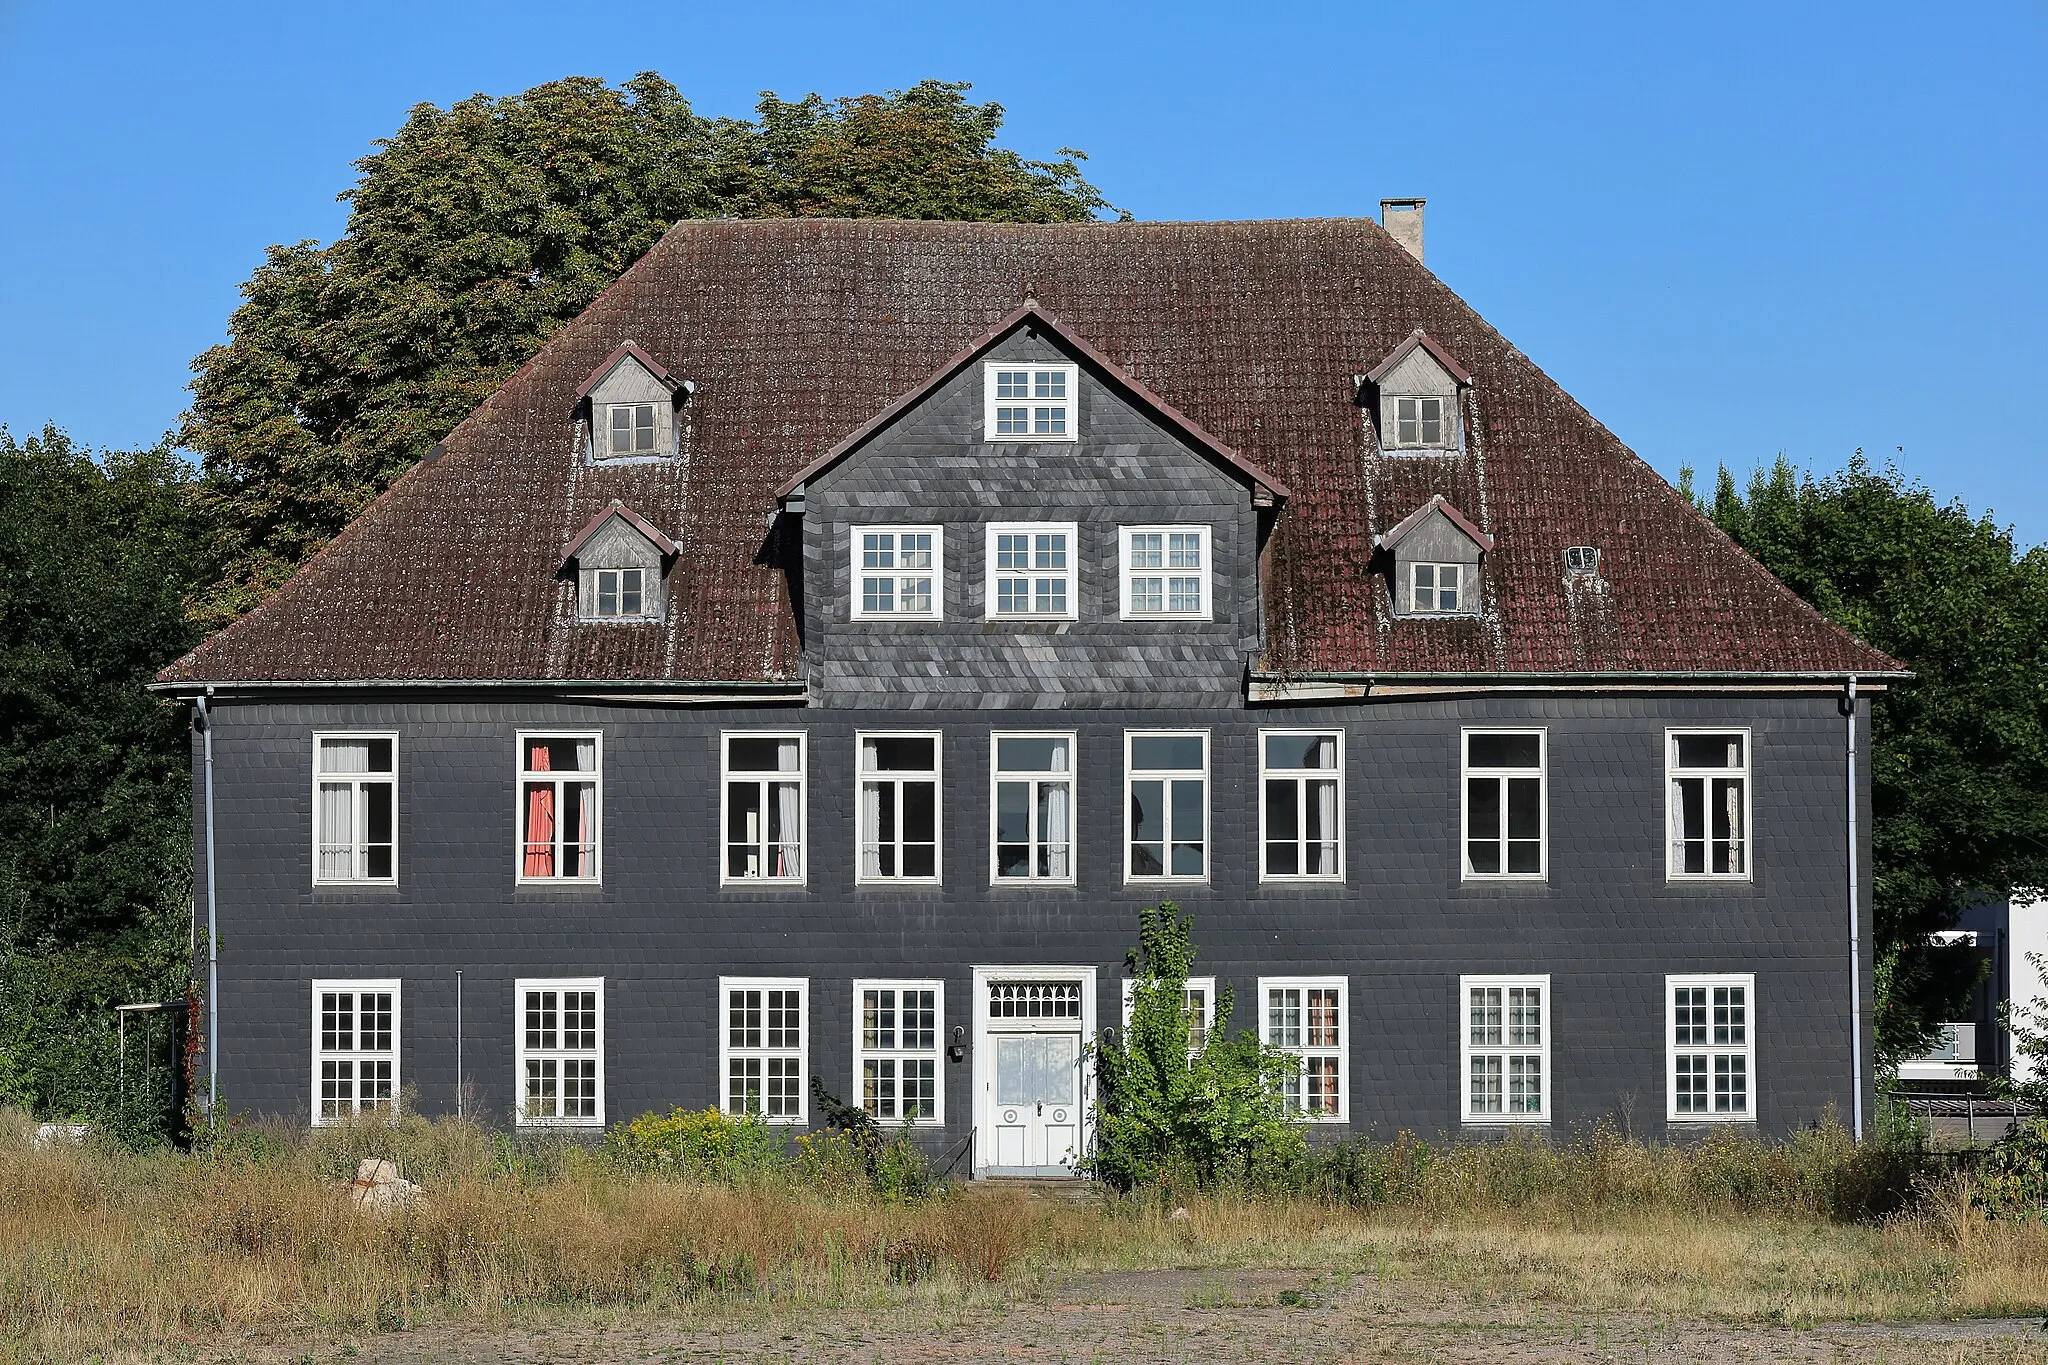 Photo showing: The manor house of the former manor of Salzgitter-Thiede, Germany